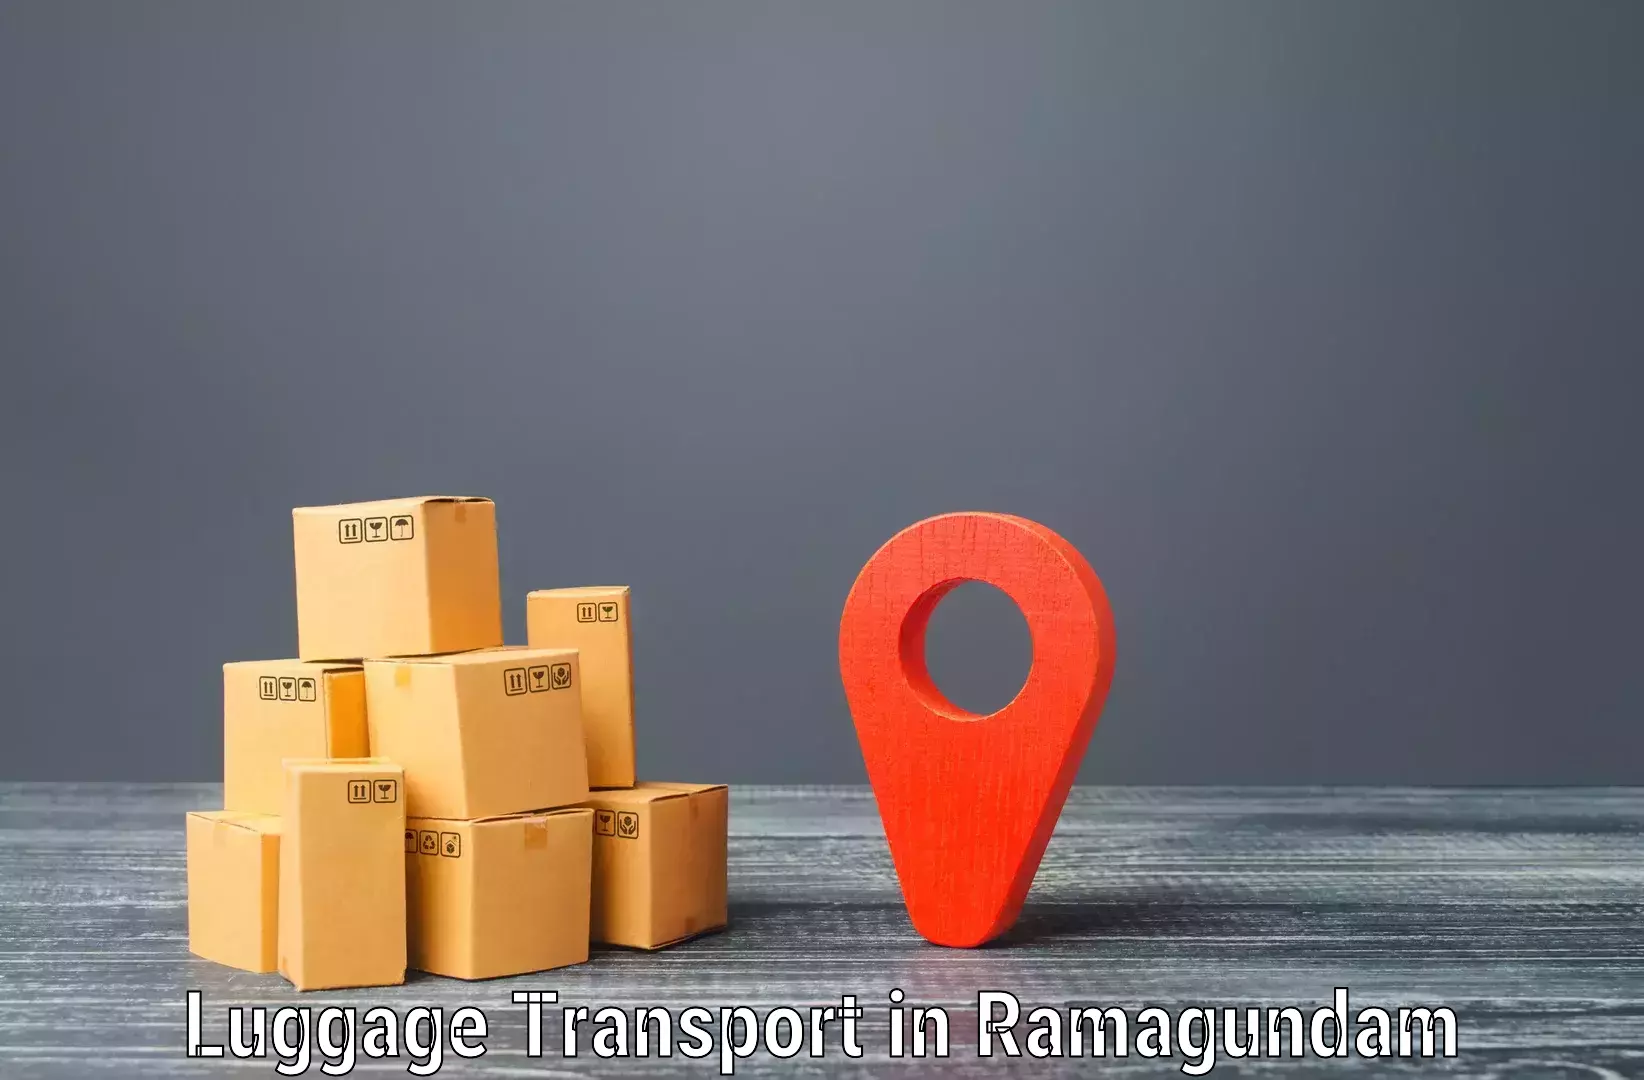 Baggage relocation service in Ramagundam